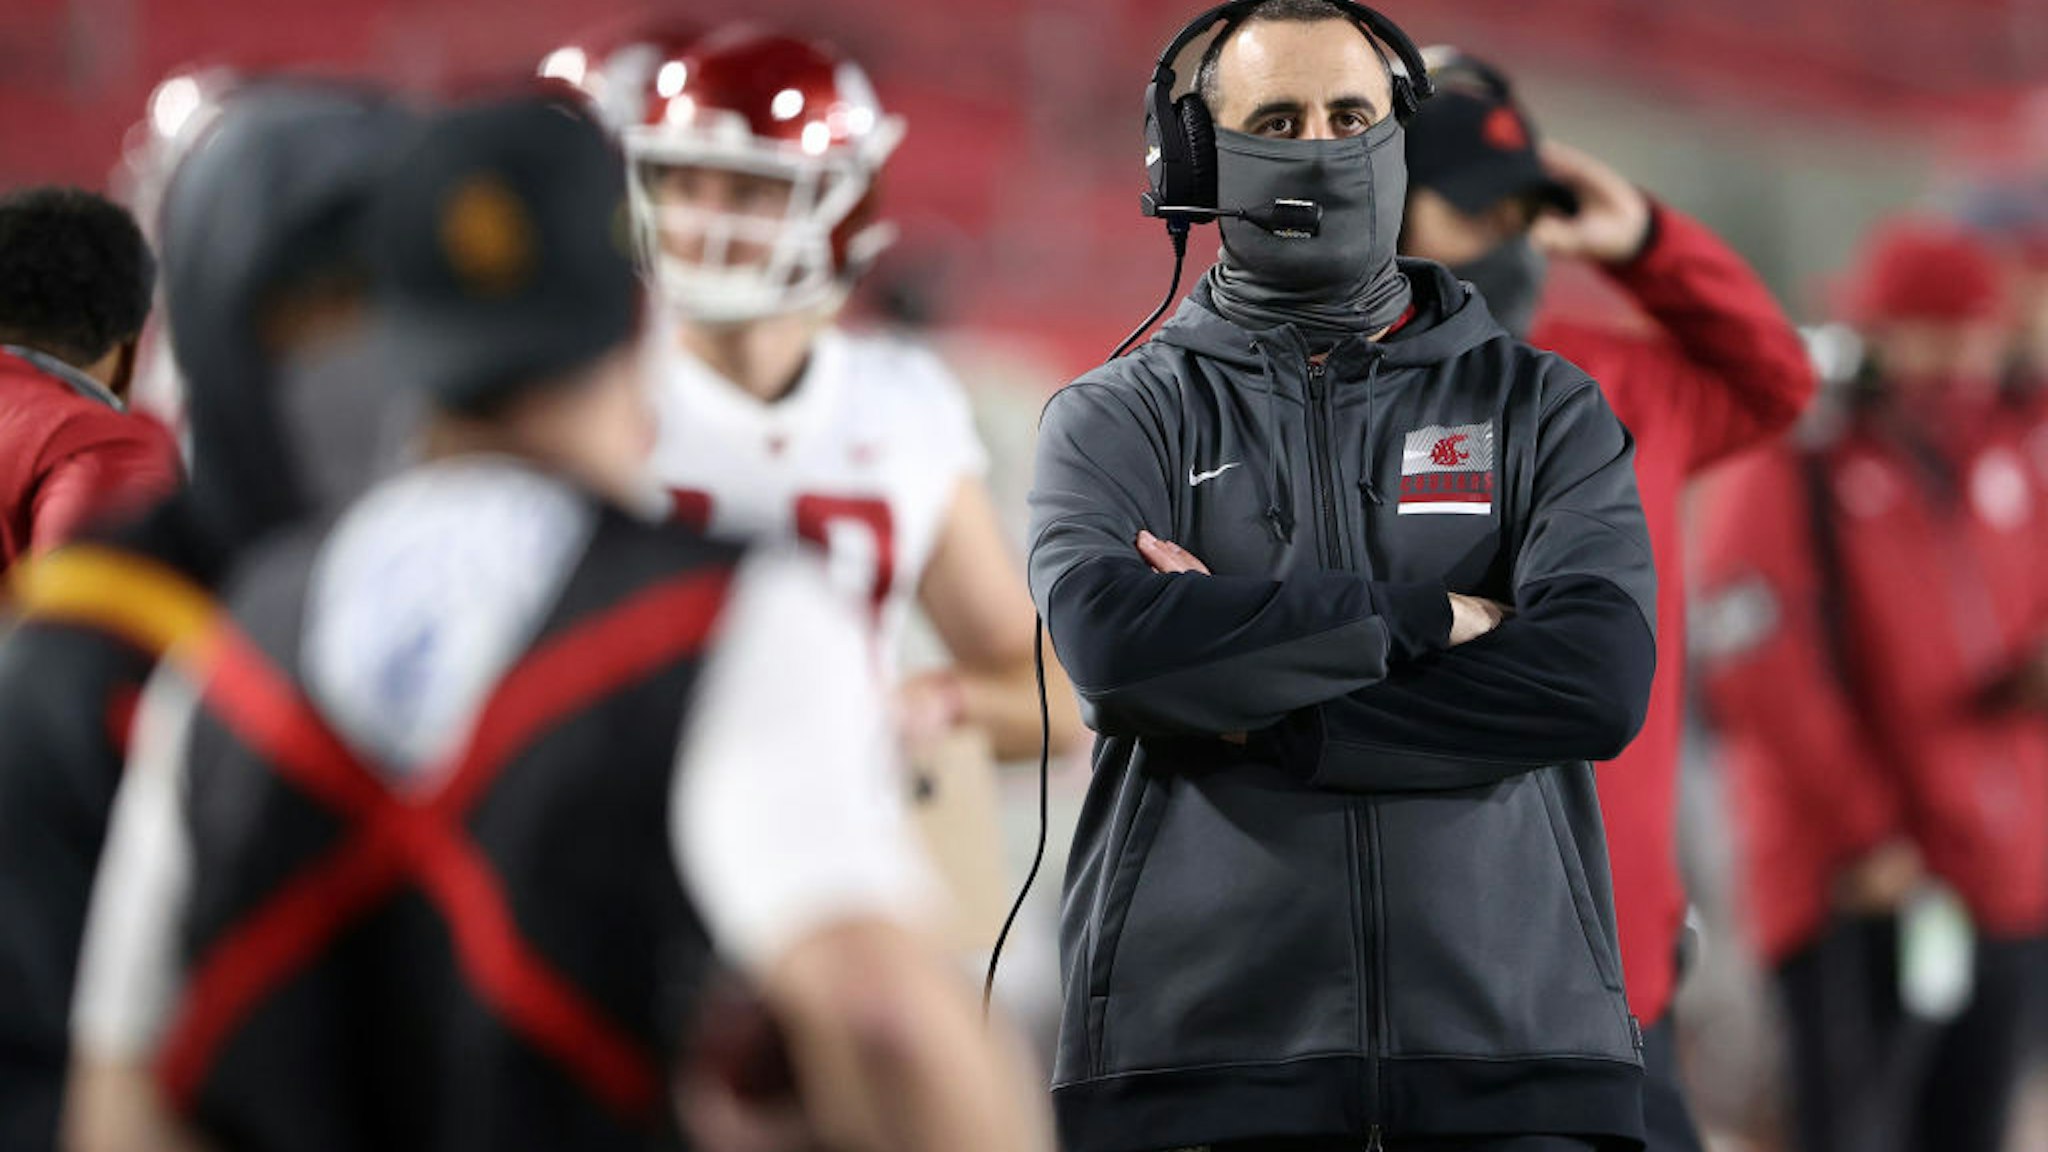 LOS ANGELES, CALIFORNIA - DECEMBER 06: Head coach Nick Rolovich of the Washington State Cougars looks on during the second half of a game against the USC Trojans at Los Angeles Coliseum on December 06, 2020 in Los Angeles, California. (Photo by Sean M. Haffey/Getty Images)